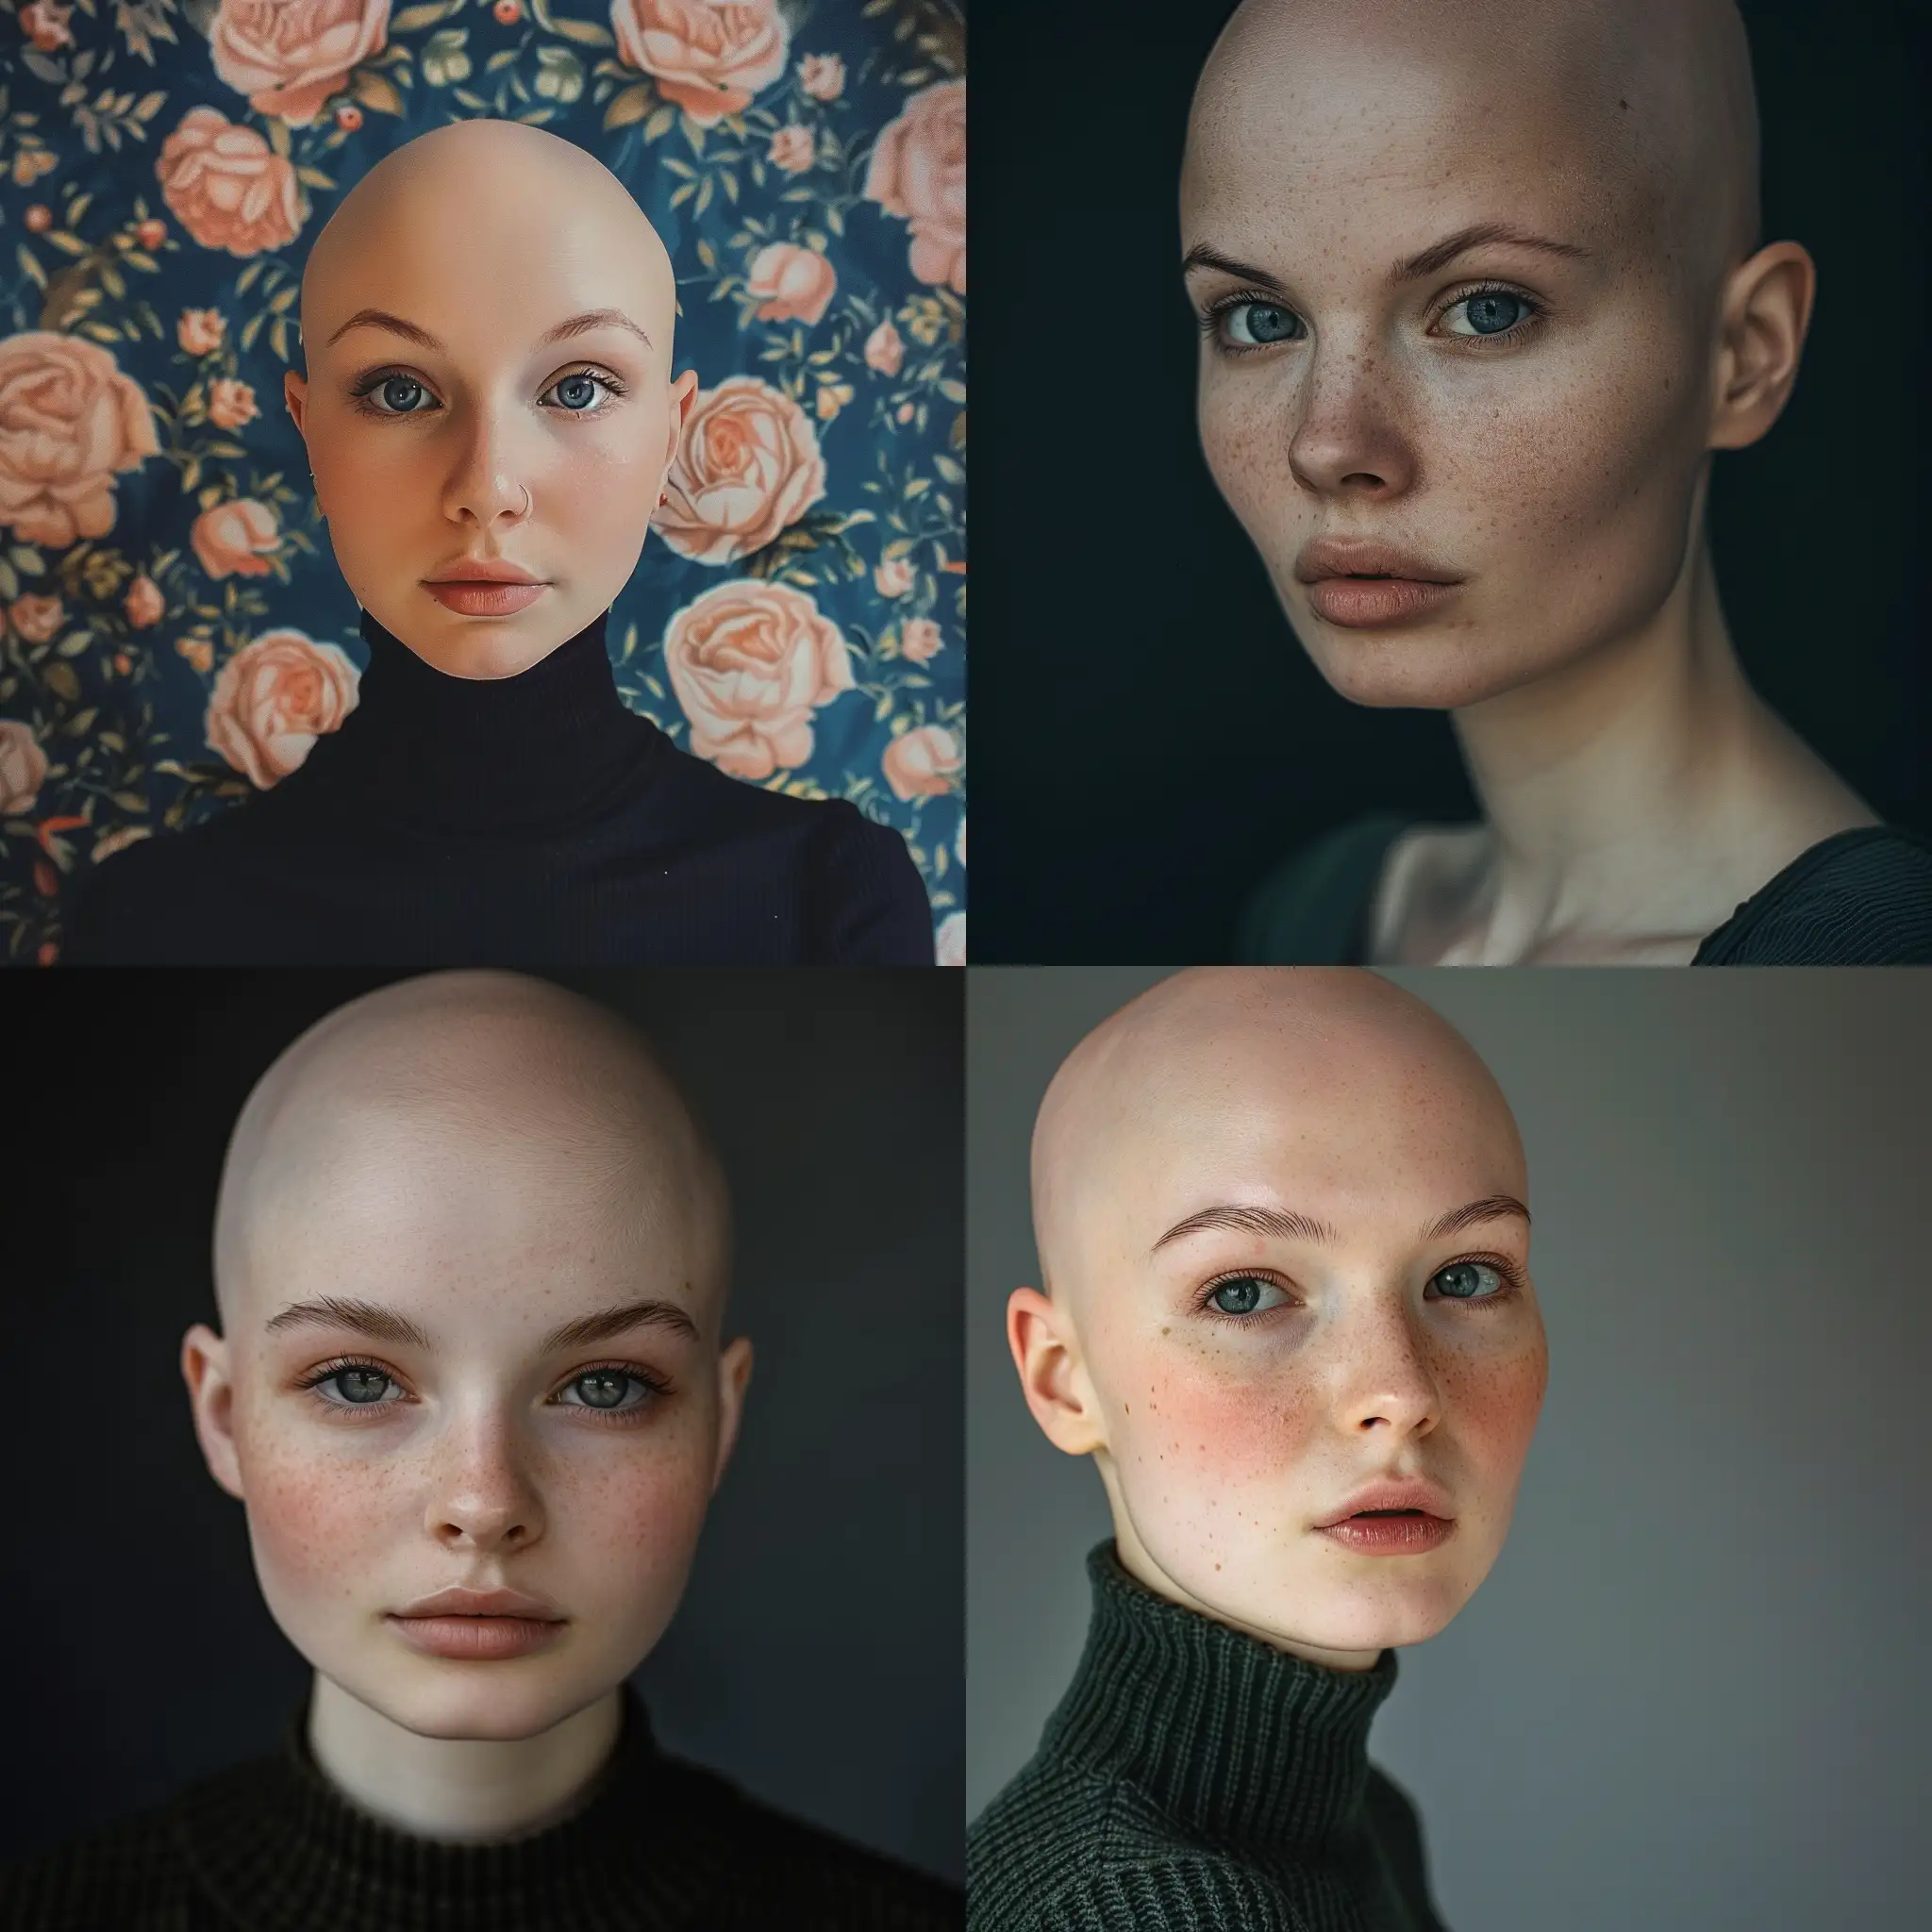 Portrait-of-Bald-Girl-with-Intense-Expression